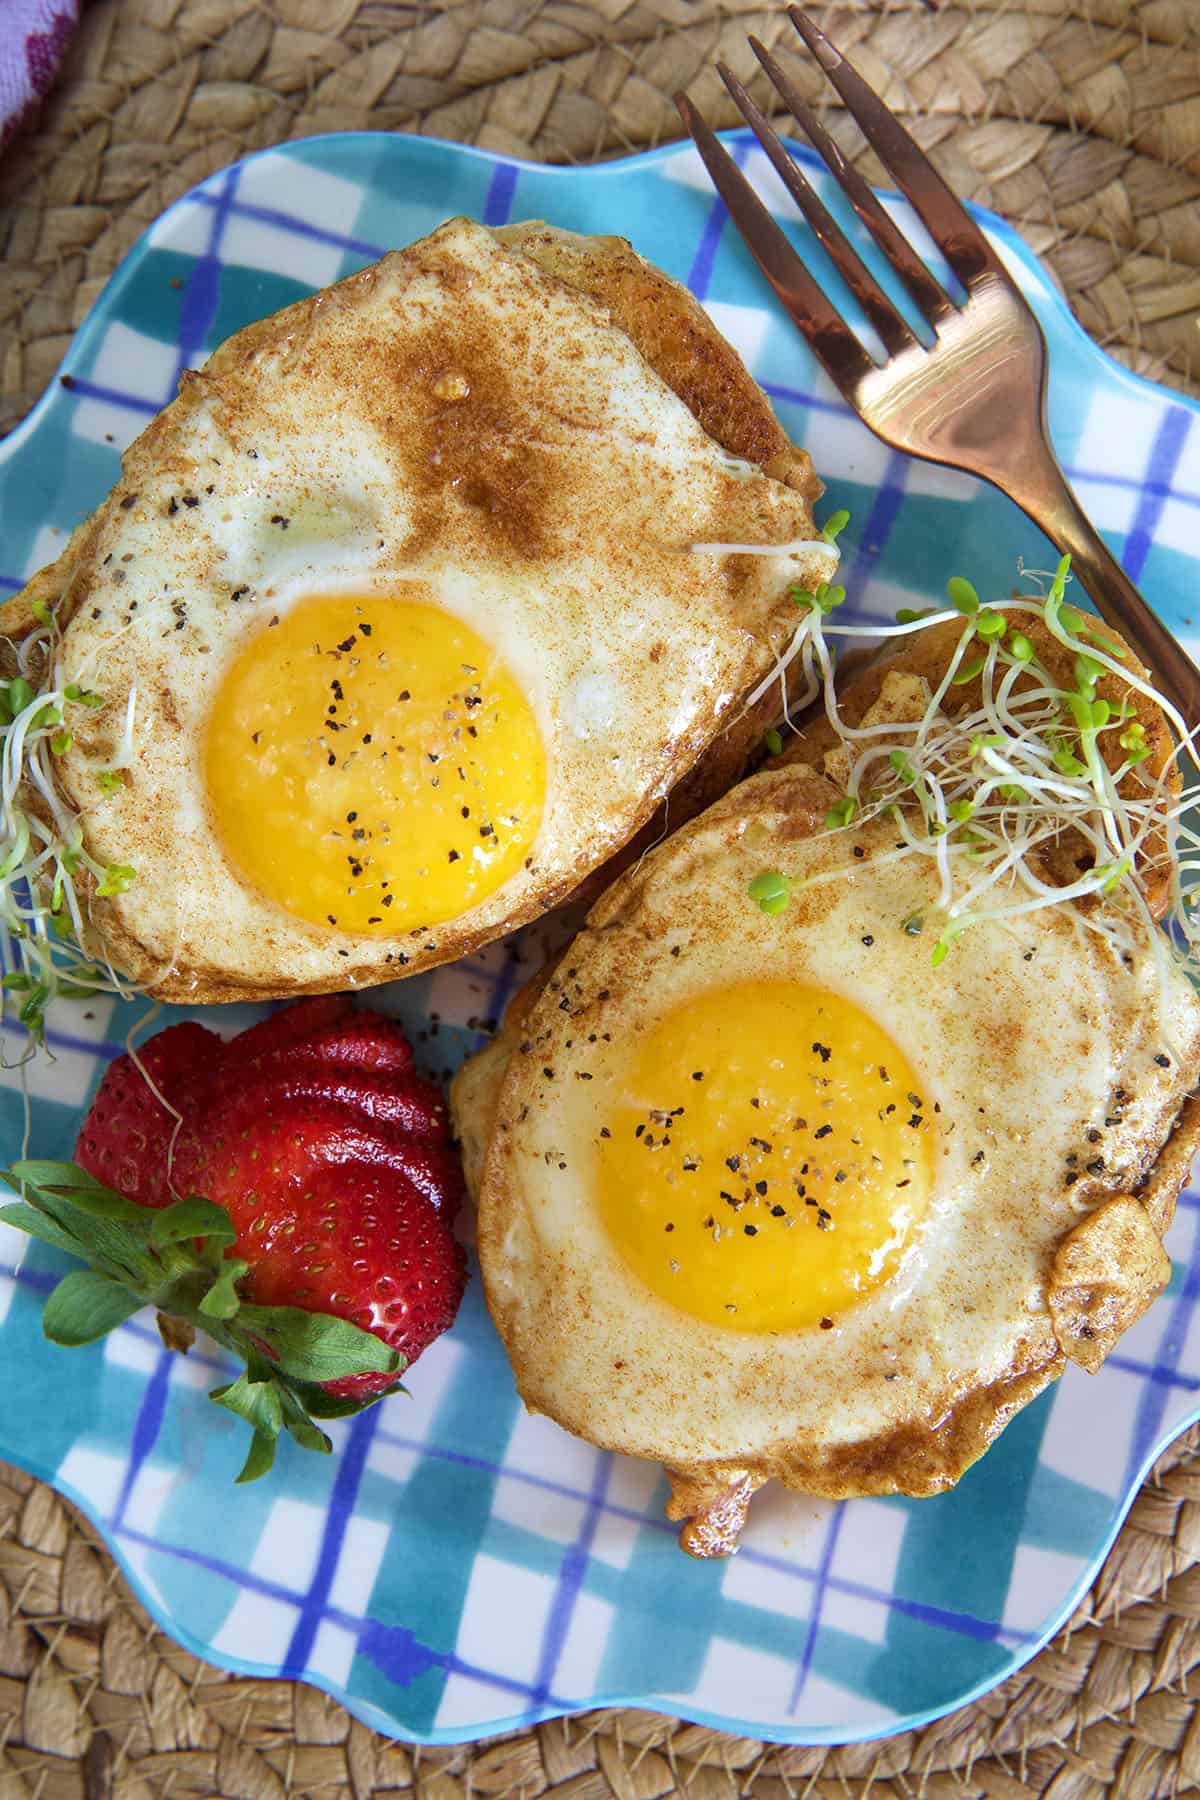 Two cooked eggs are presented on pieces of toast.